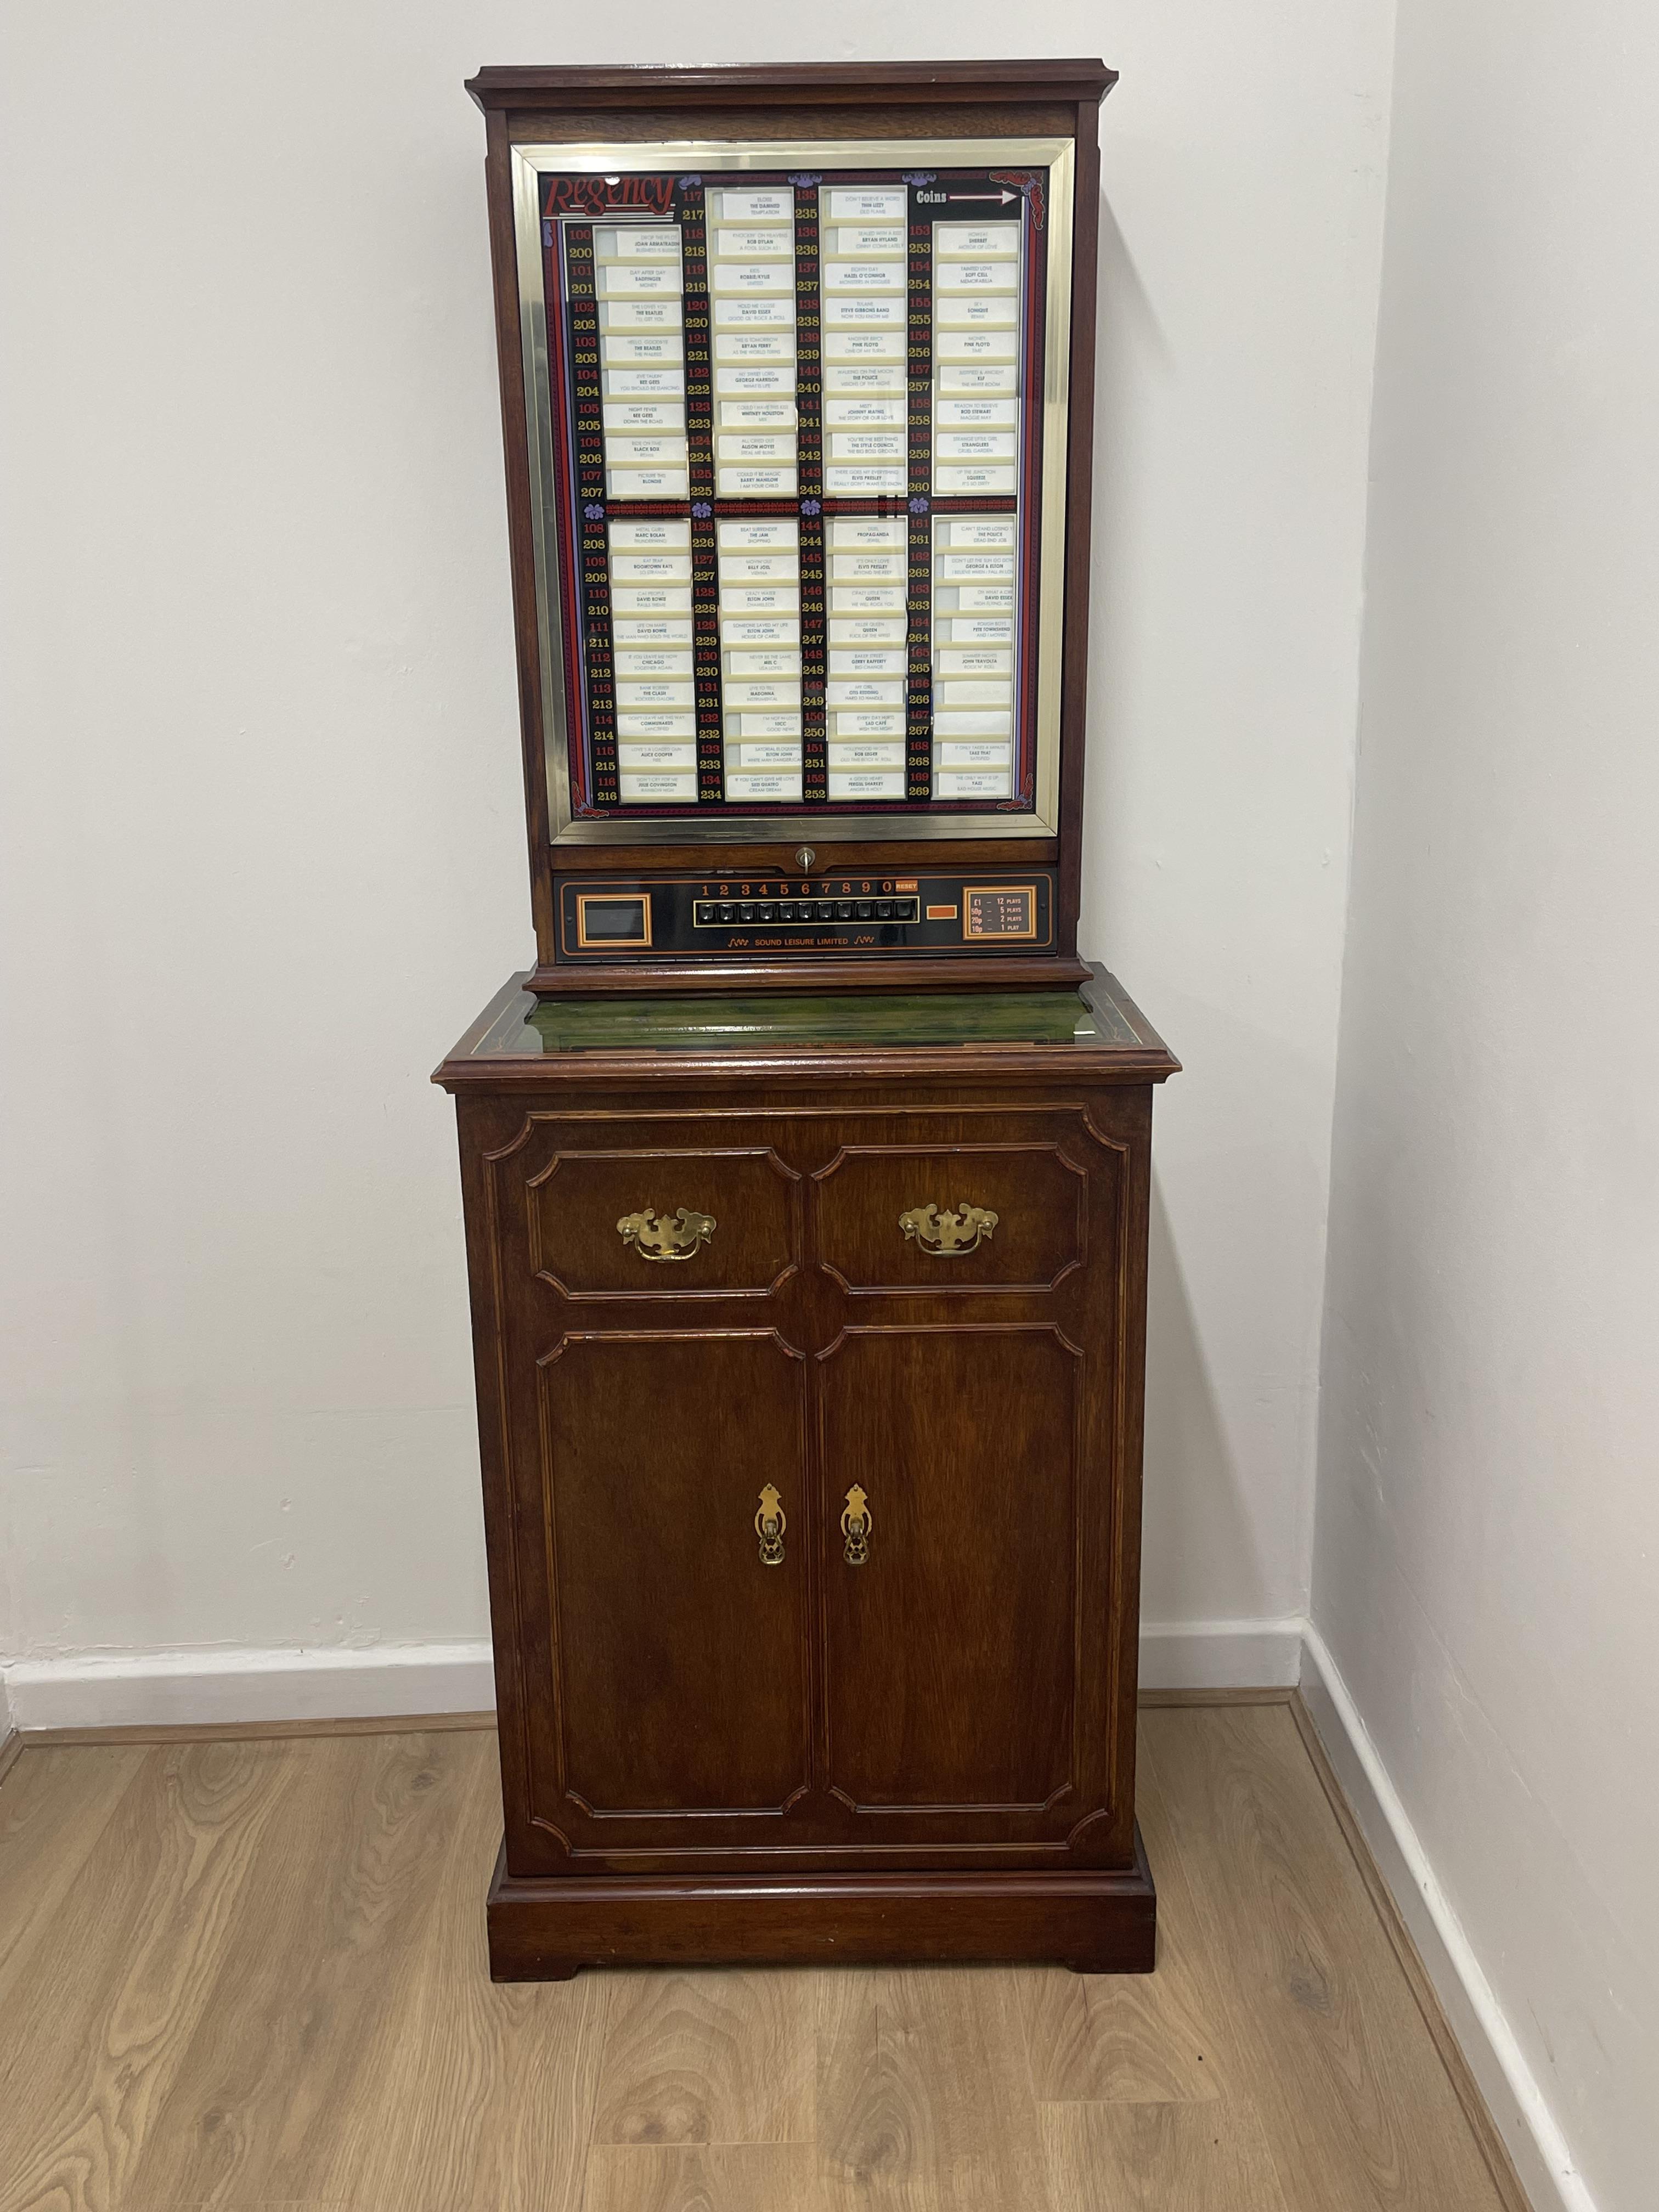 Regency “Sound leisure limited” juke box, with key & large quantity of 45’s records - H172 W41 L64